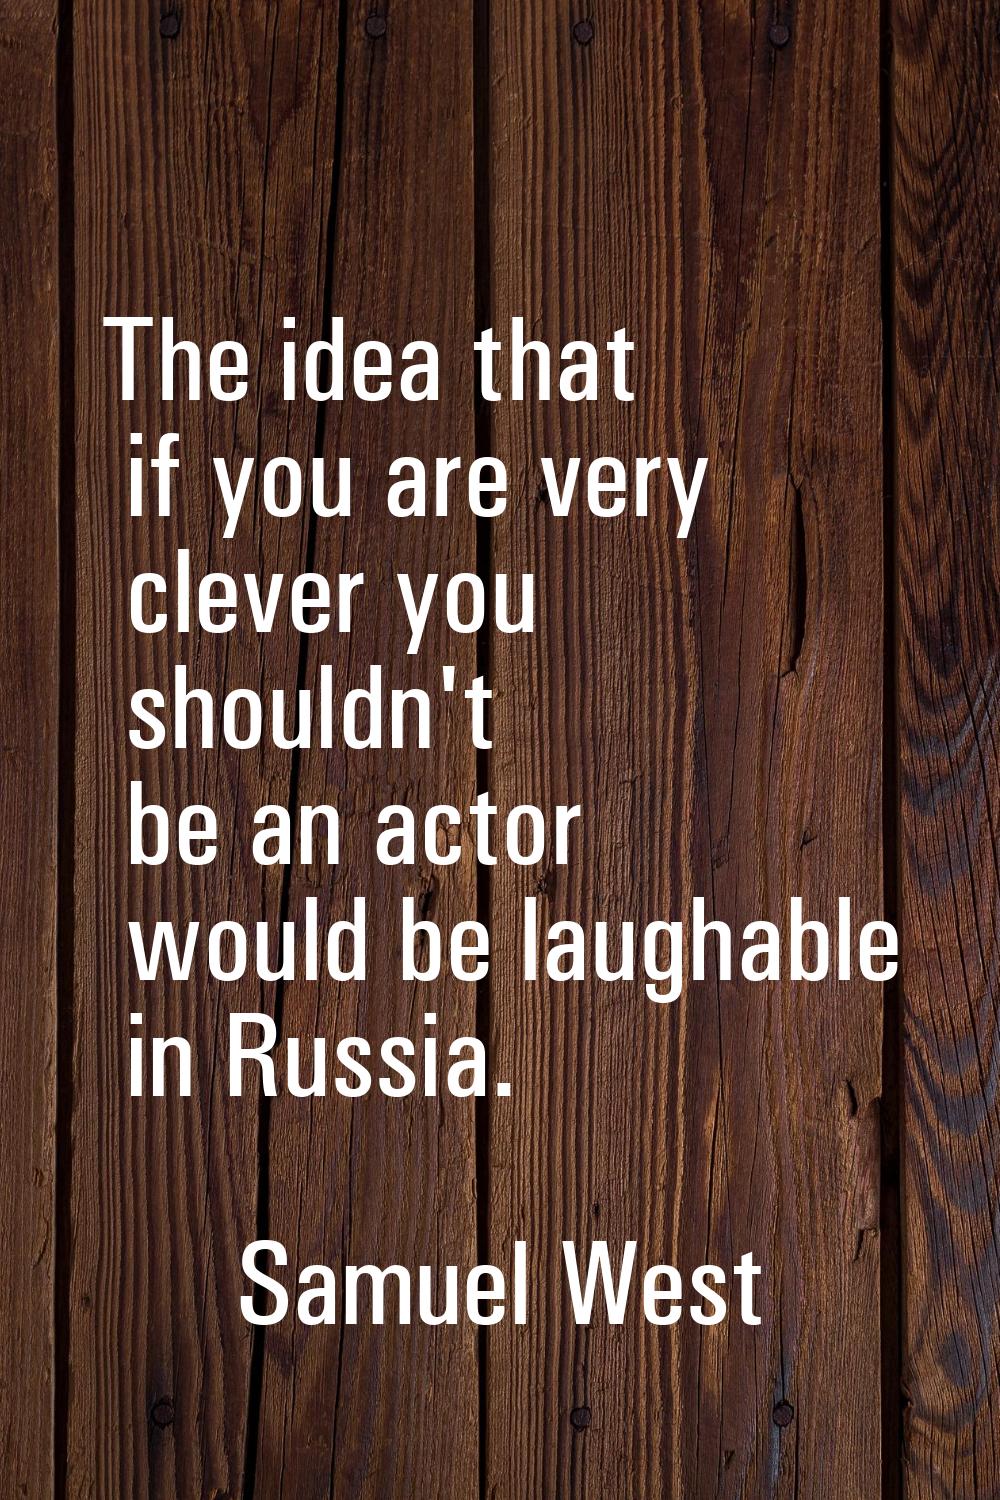 The idea that if you are very clever you shouldn't be an actor would be laughable in Russia.